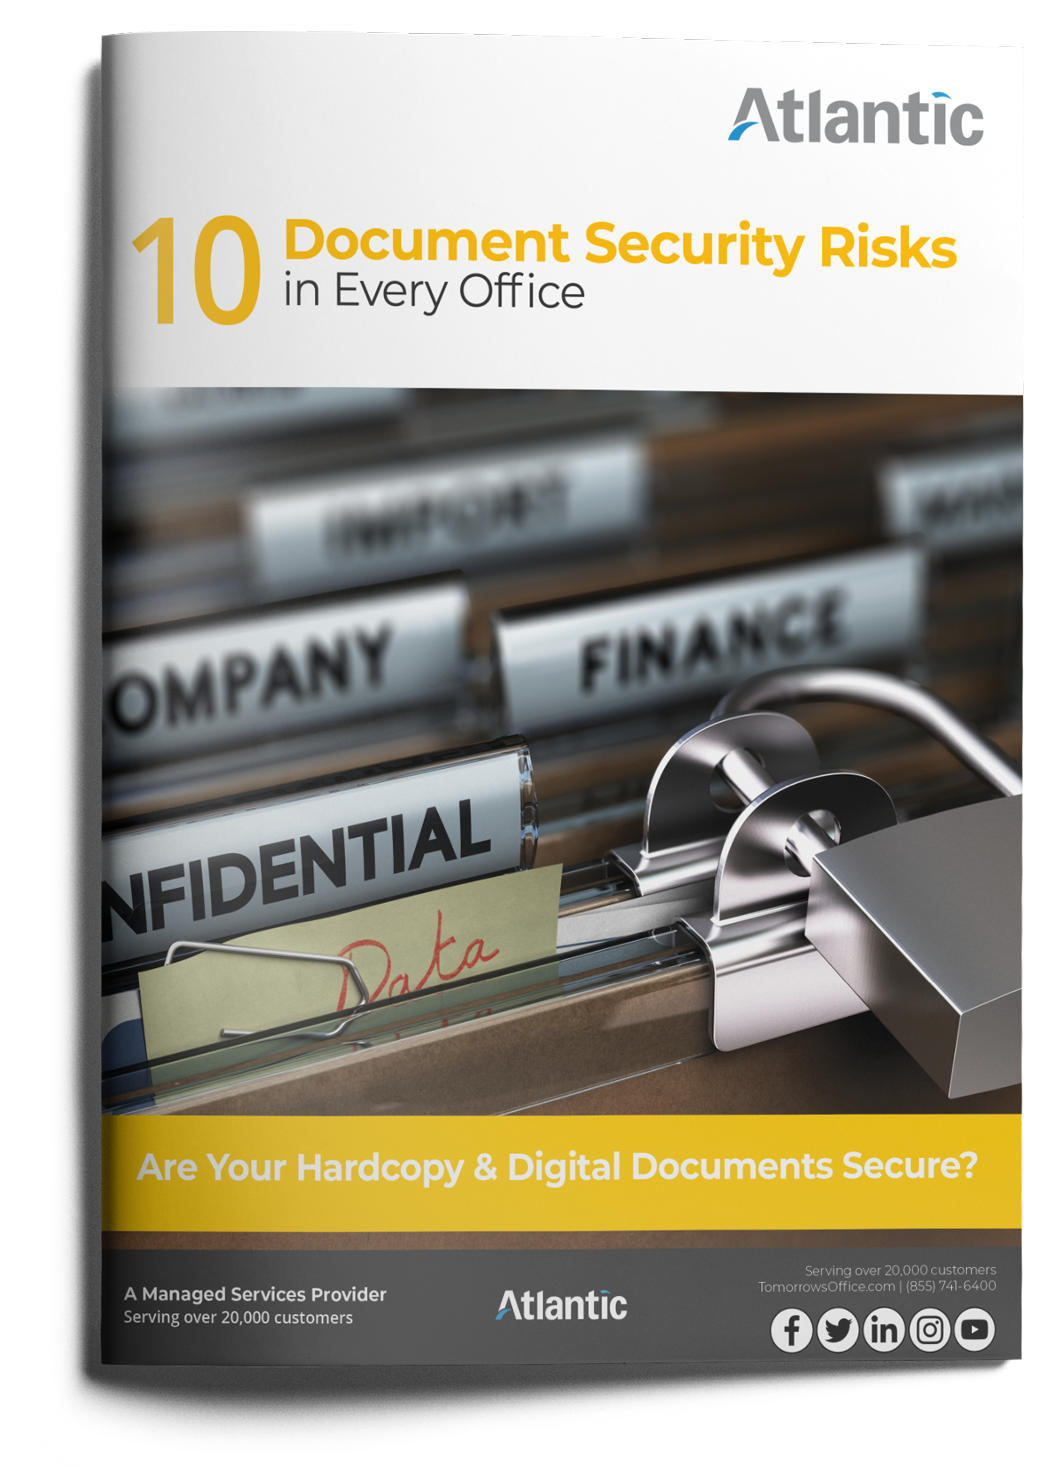 10 document security risks in every office ebook cover with text. Are your hardcopy and digital documents secure?